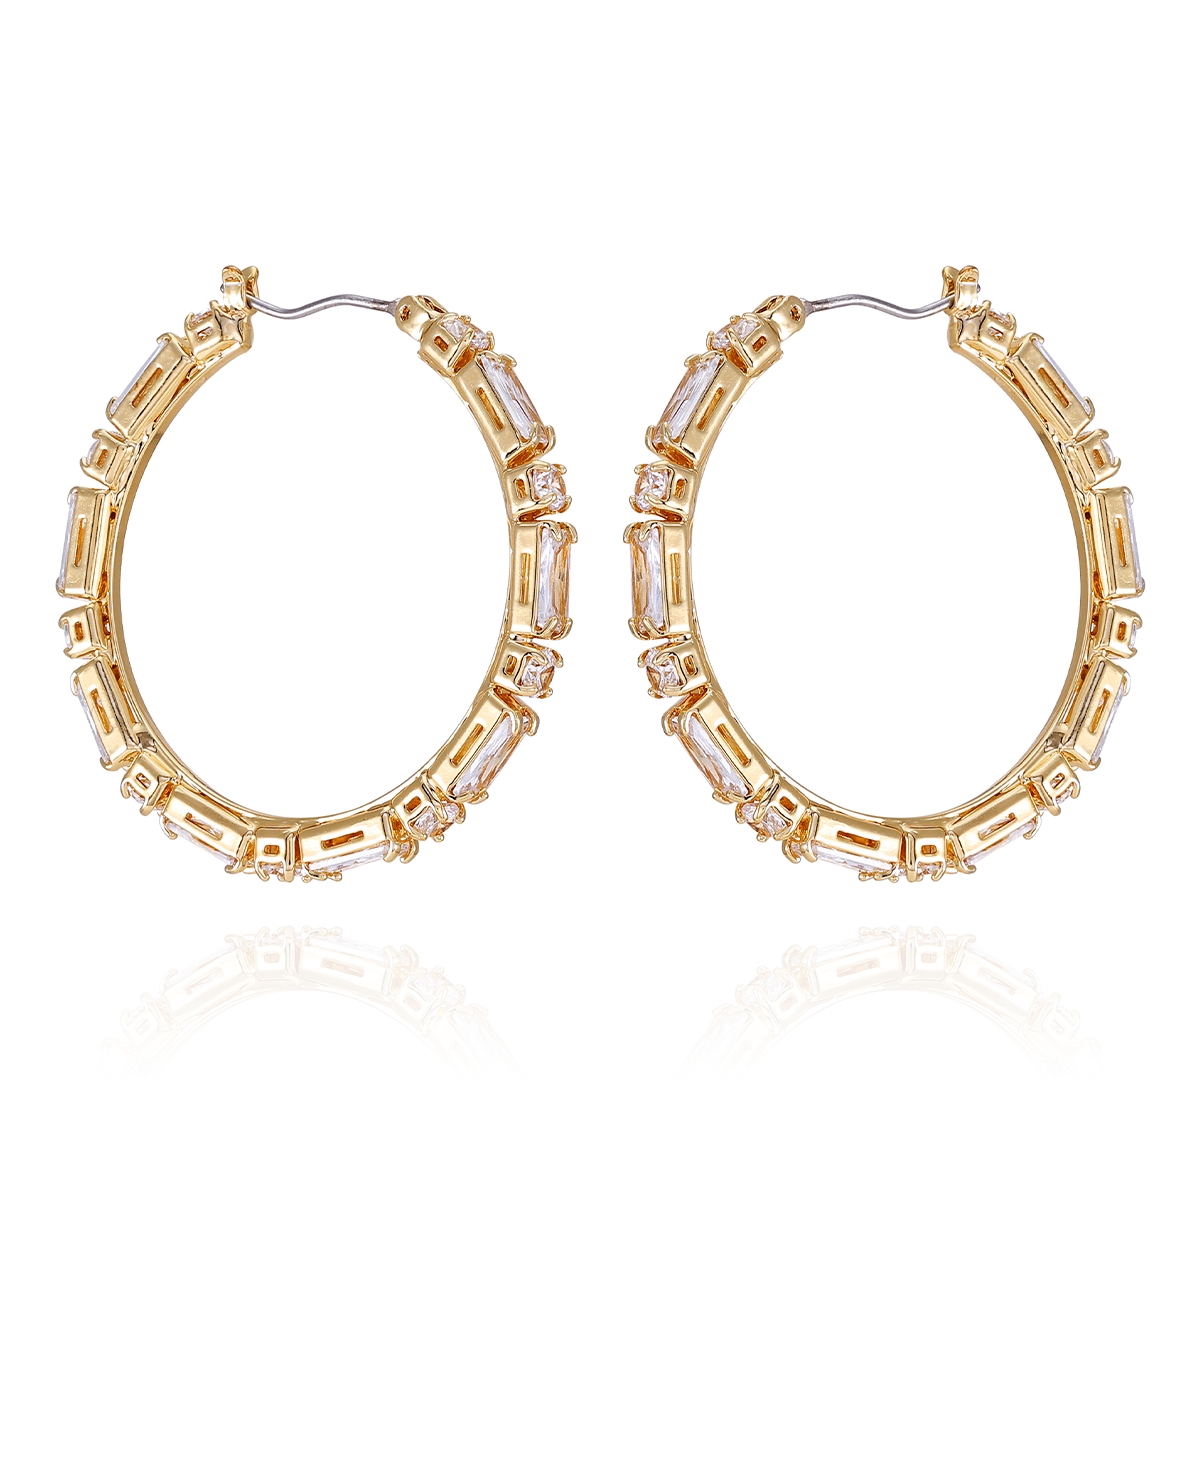 Vince Camuto Gold-tone Clear Glass Stone Hoop Earrings